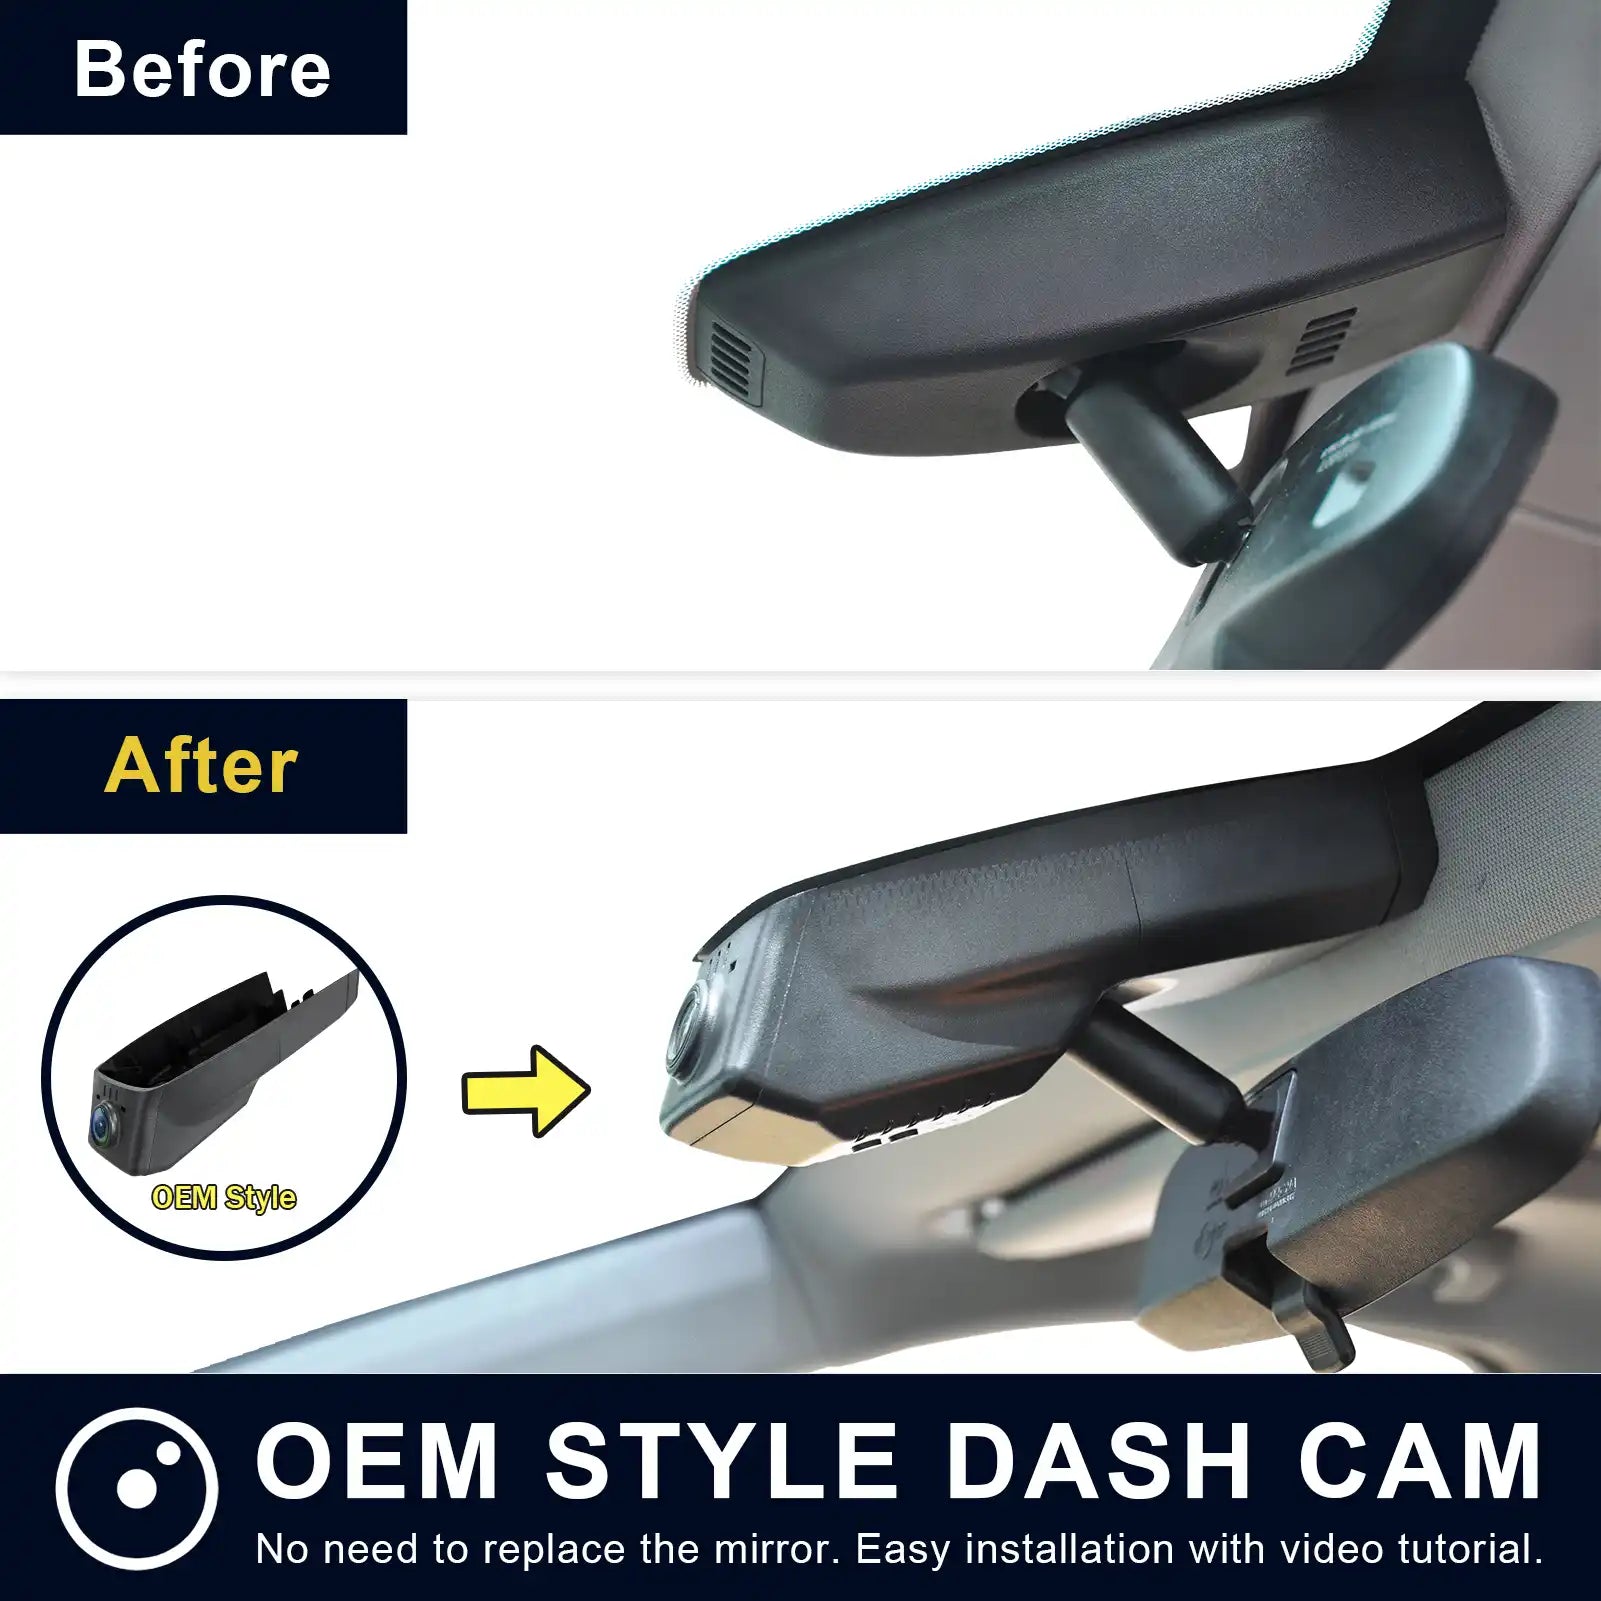 Chevy Traverse dash cam before and after installation view 